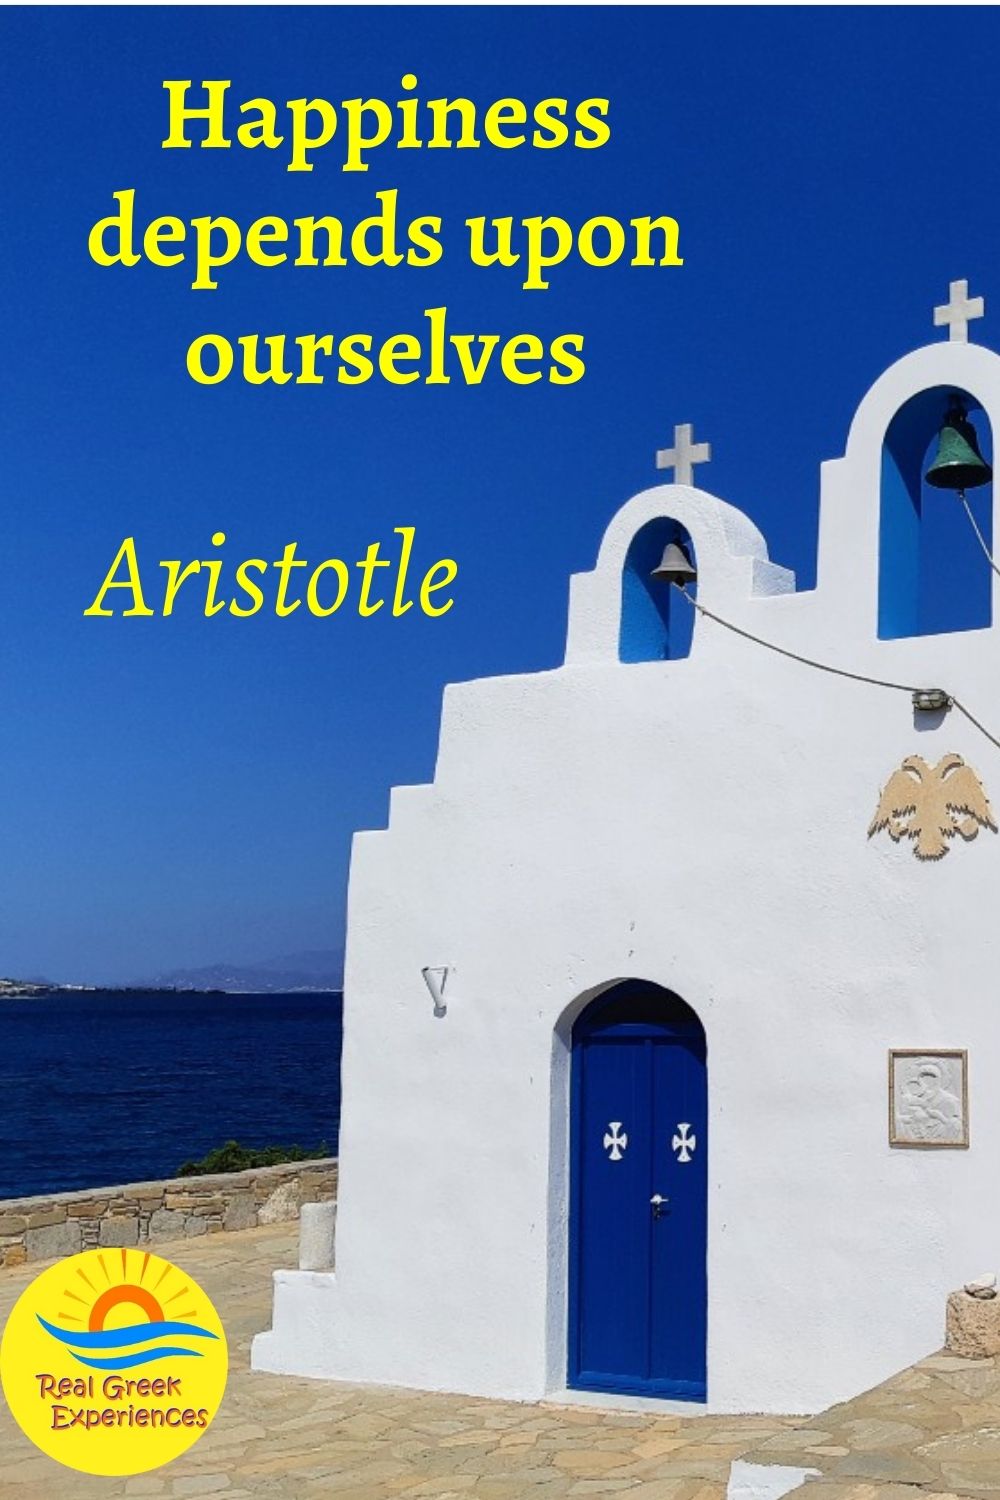 Quotes Greece - Happiness depends upon ourselves - Aristotle